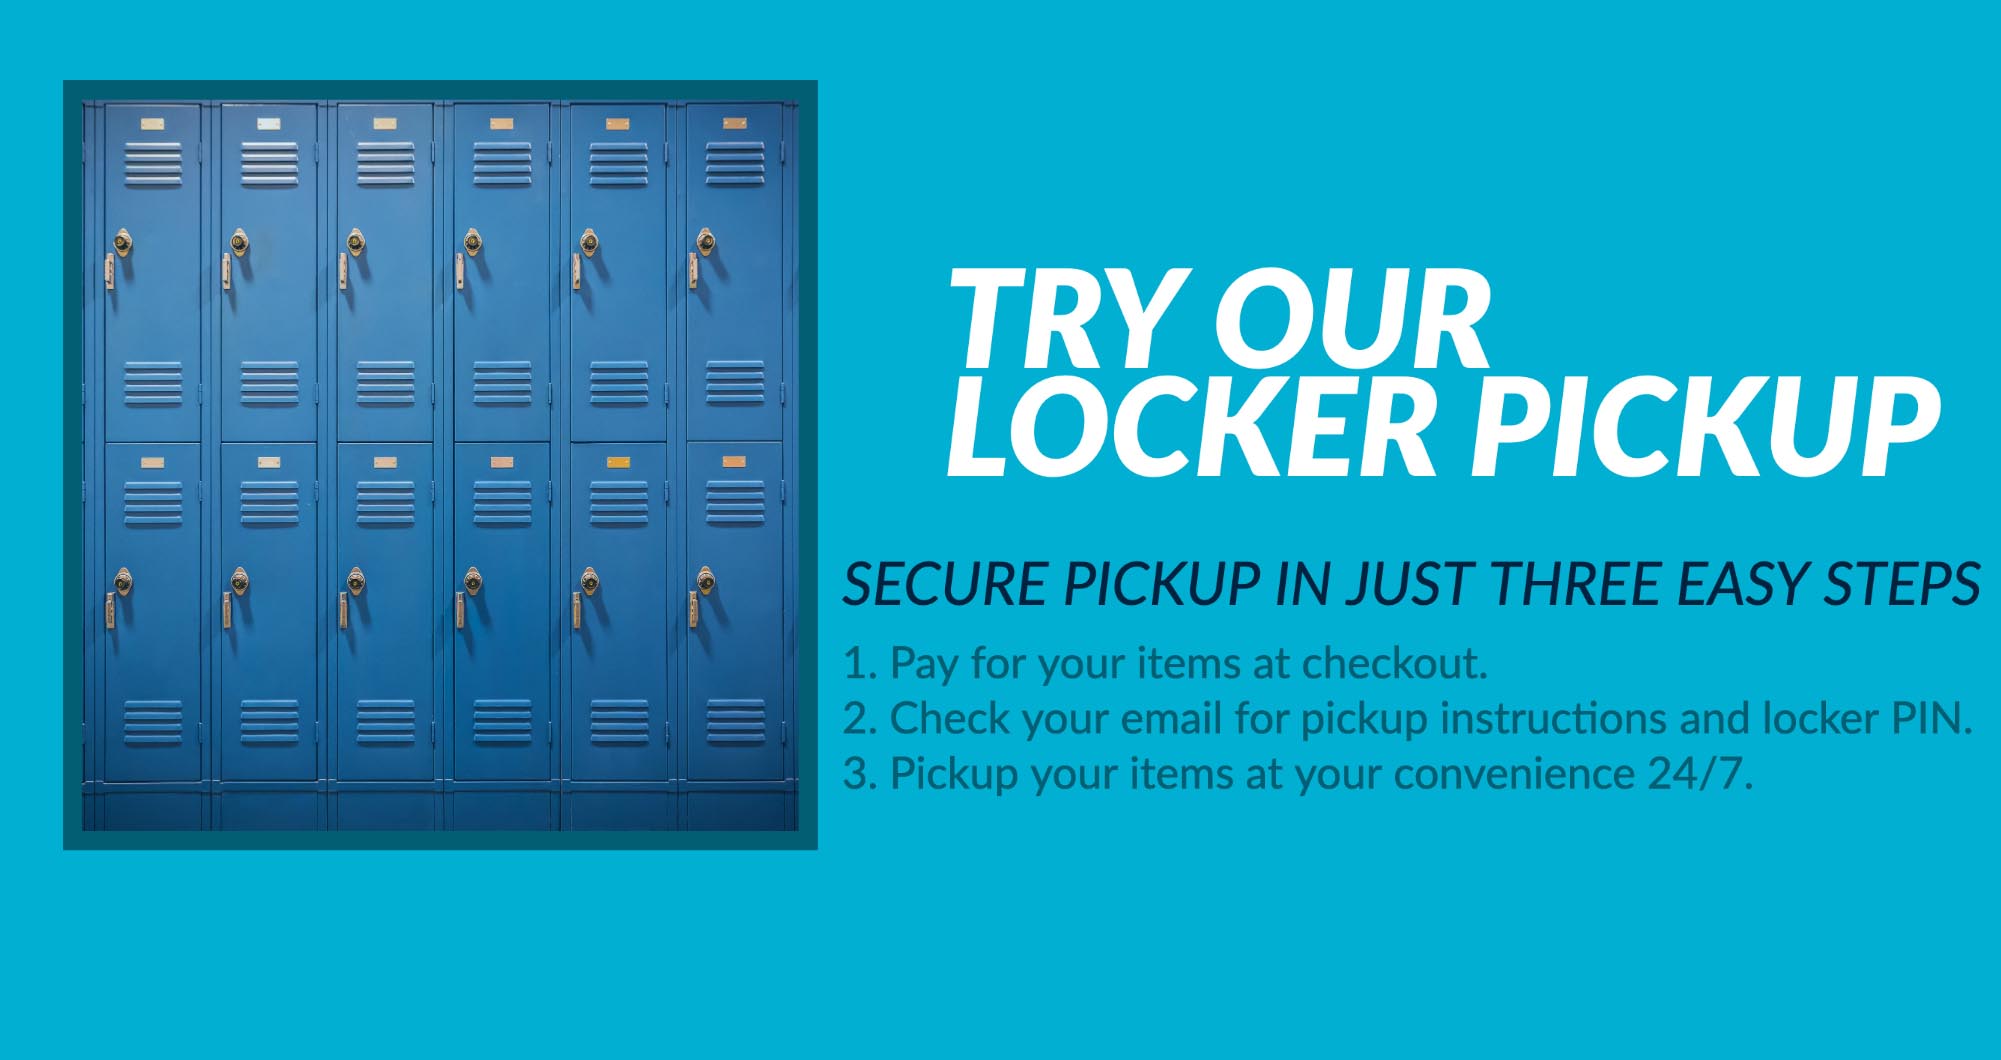 Locker Pickup is Fast, Easy, Secure, and Contact-Free!